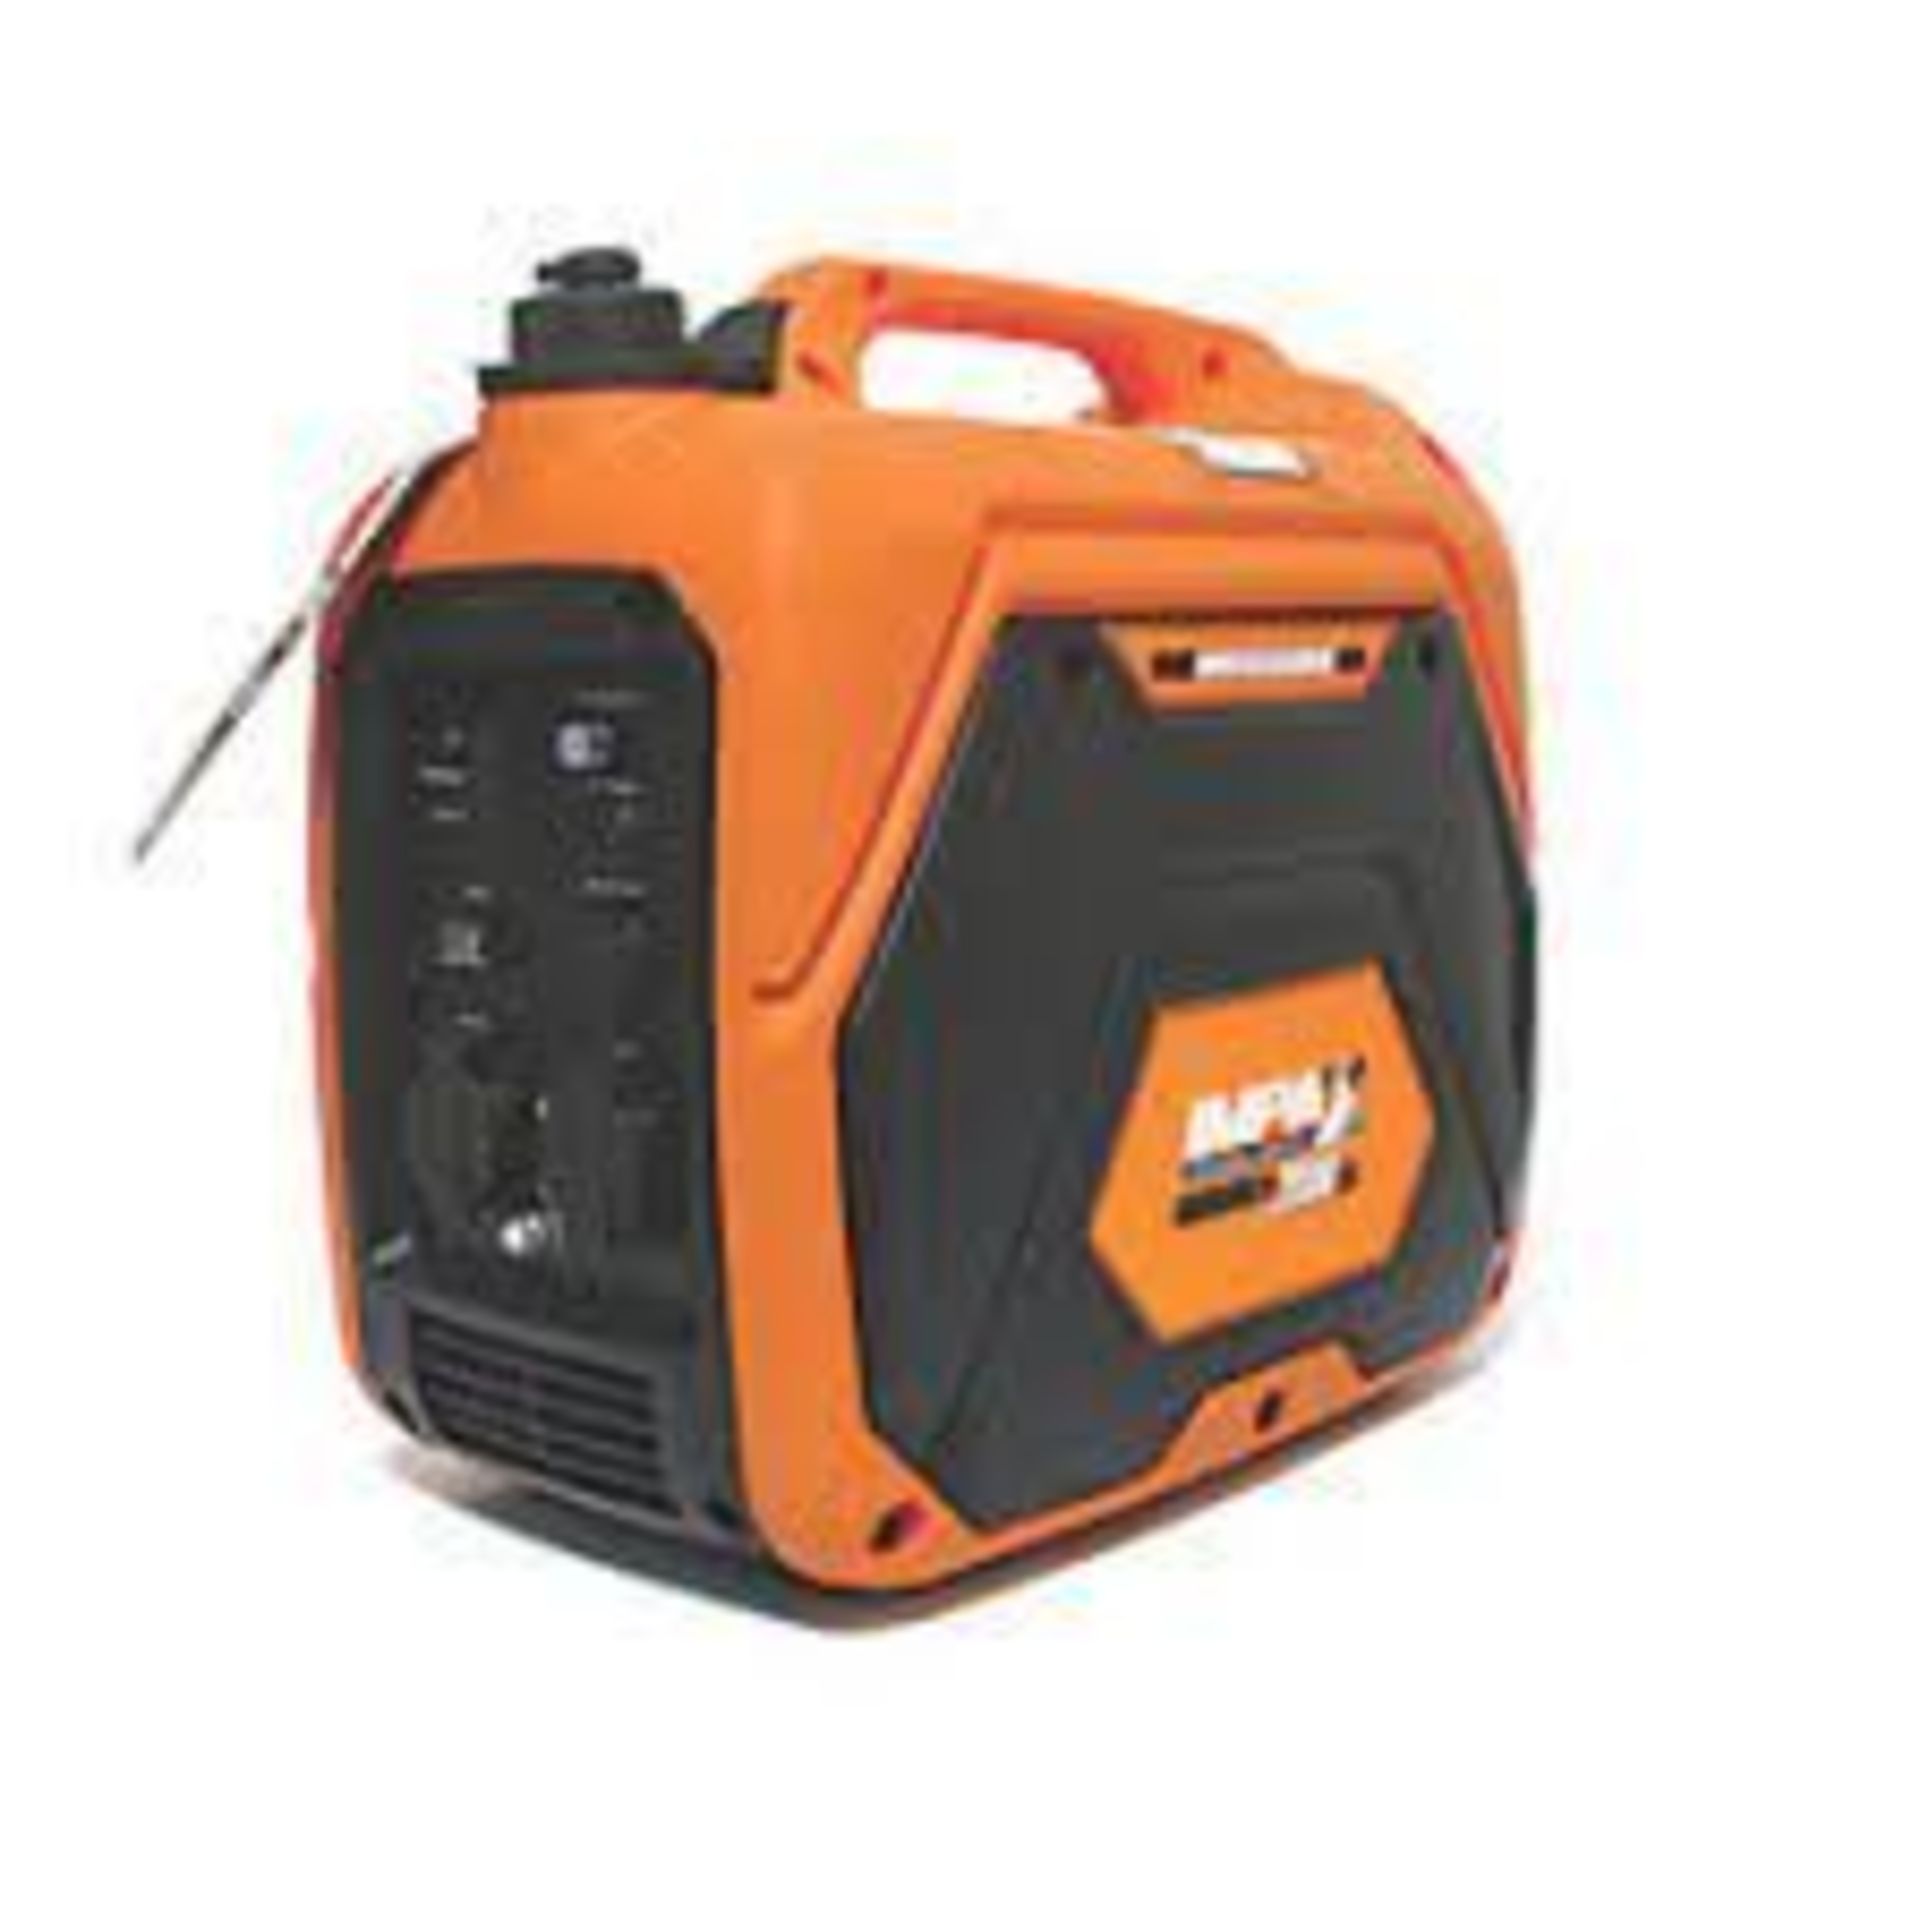 IMPAX IM2000SIG 1800W INVERTER GENERATOR 230V. - R13A.10. Lightweight, durable and fully-enclosed